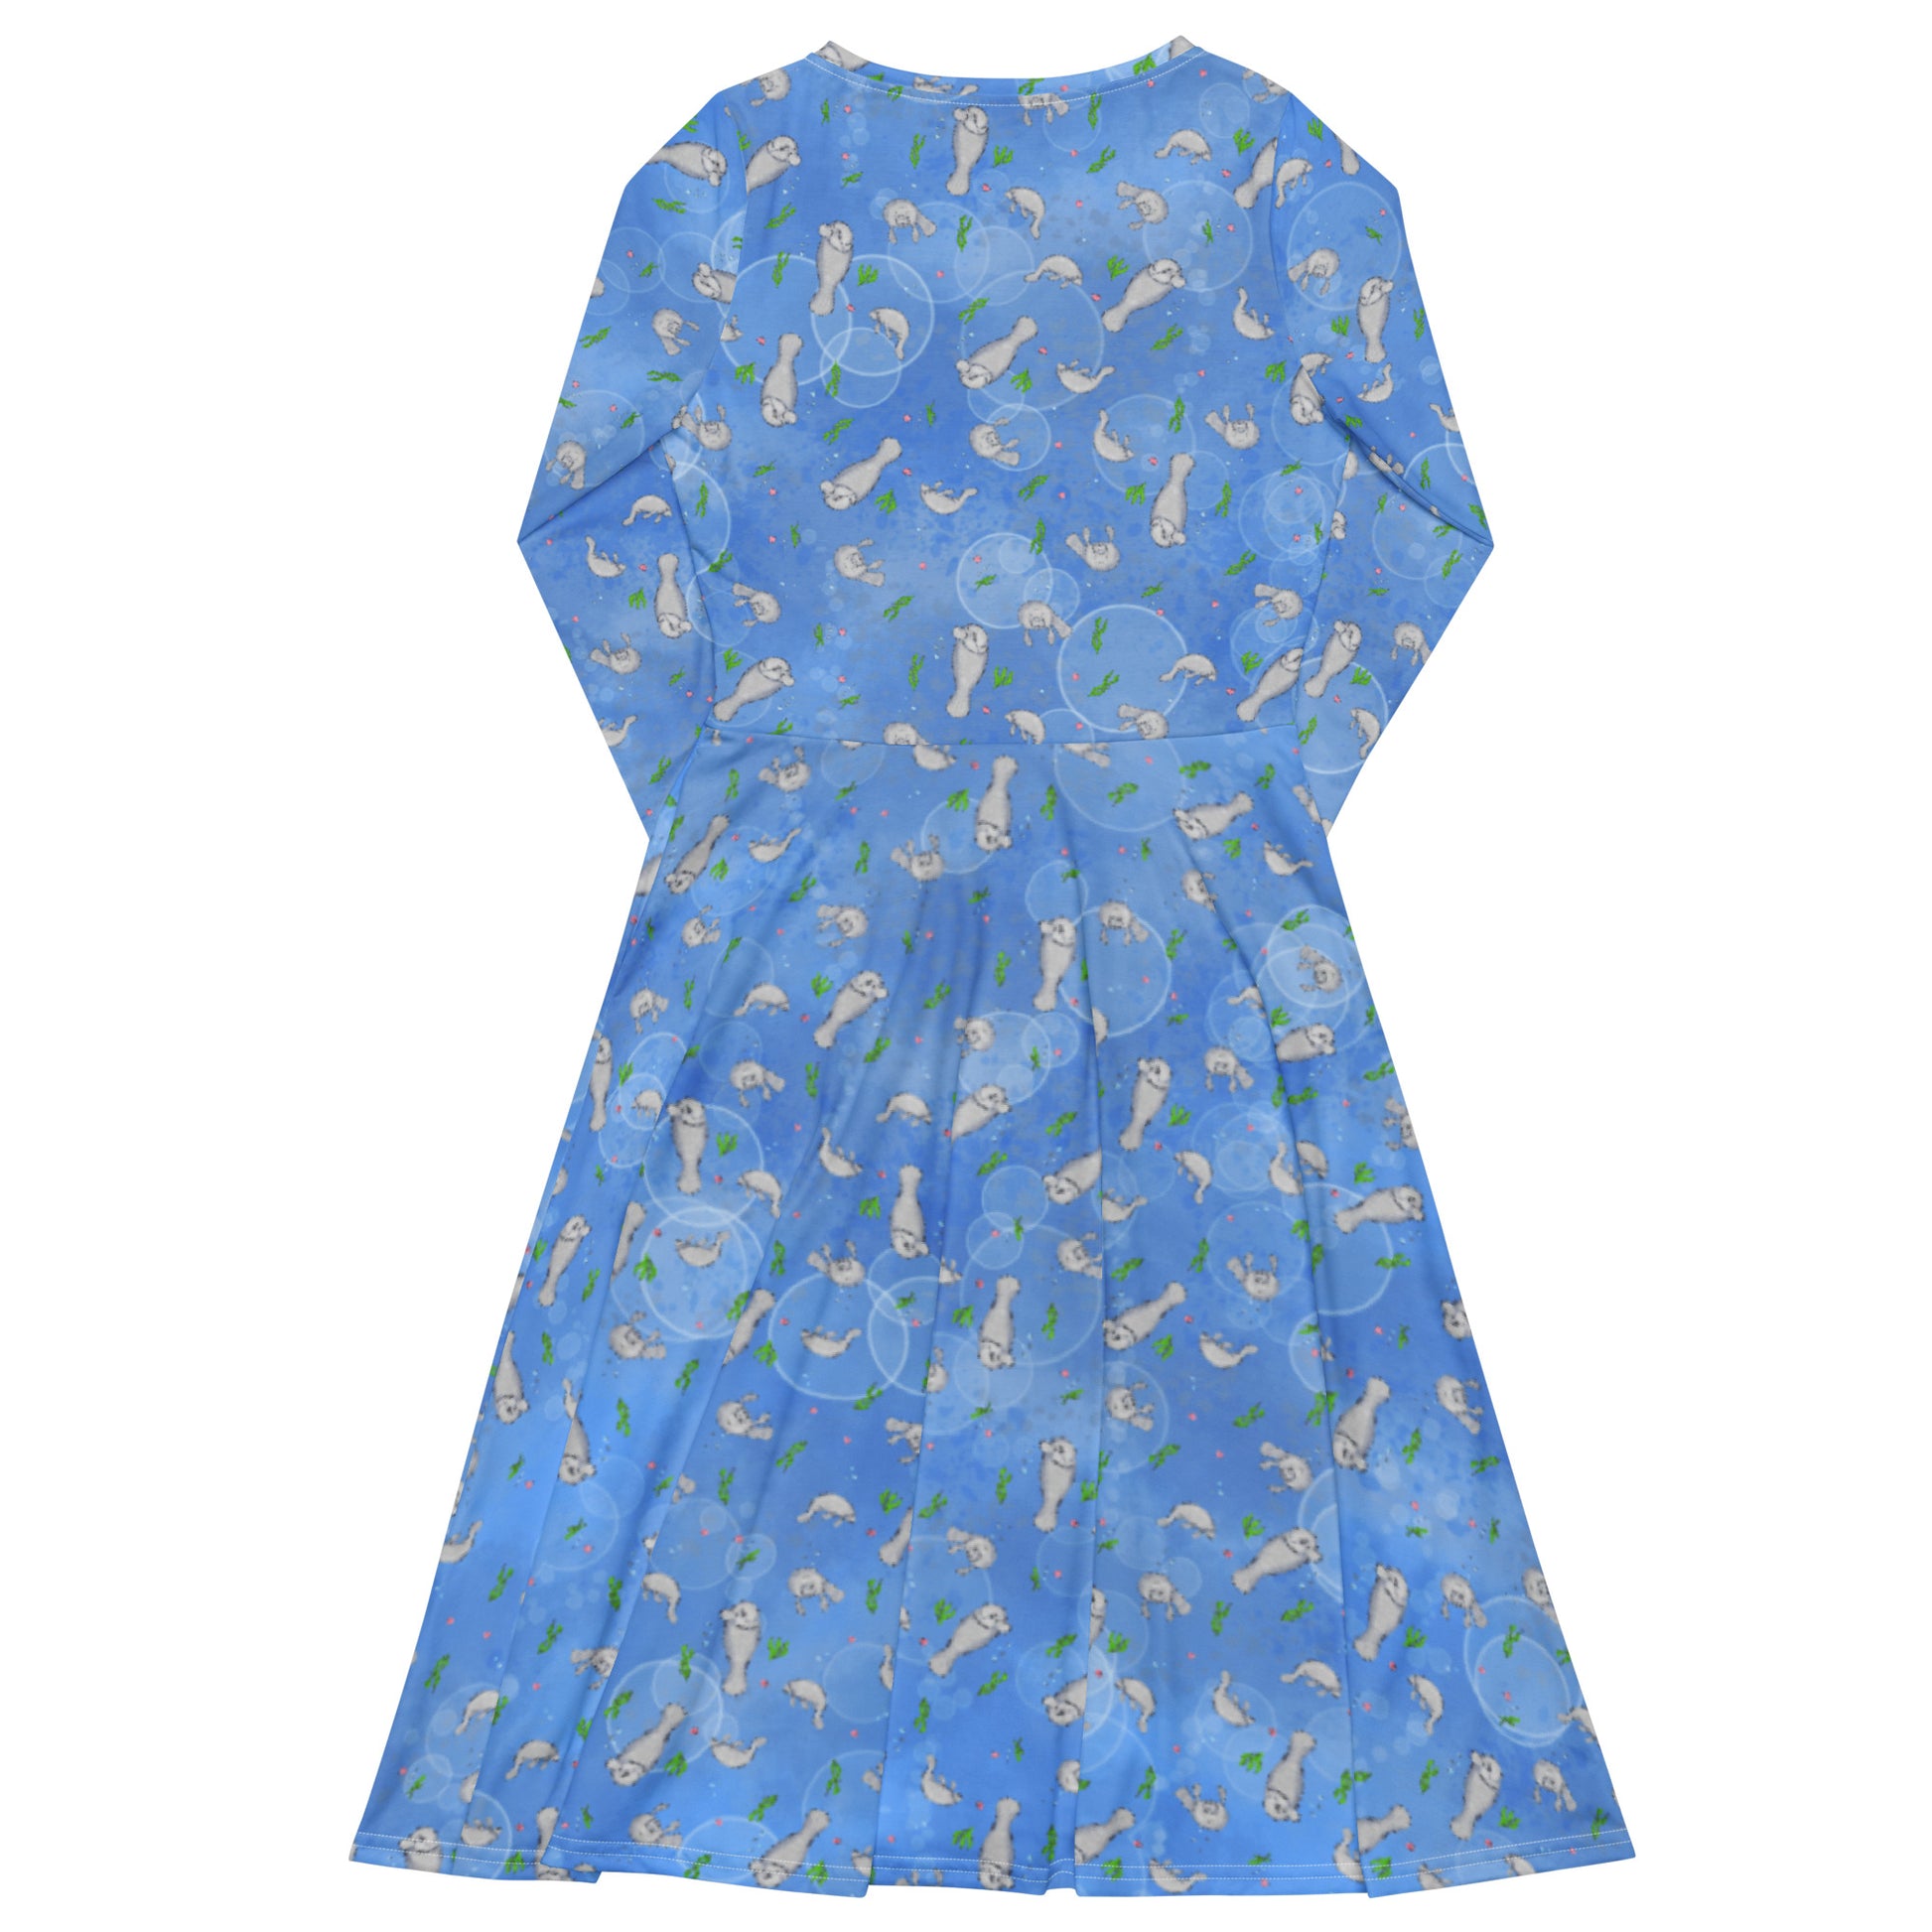 Long sleeve midi dress with fitted waist, flared bottom, and side pockets. Features a patterned design of manatees, seashells, seaweed, and bubbles on an ocean blue background. Flat lay view of back.